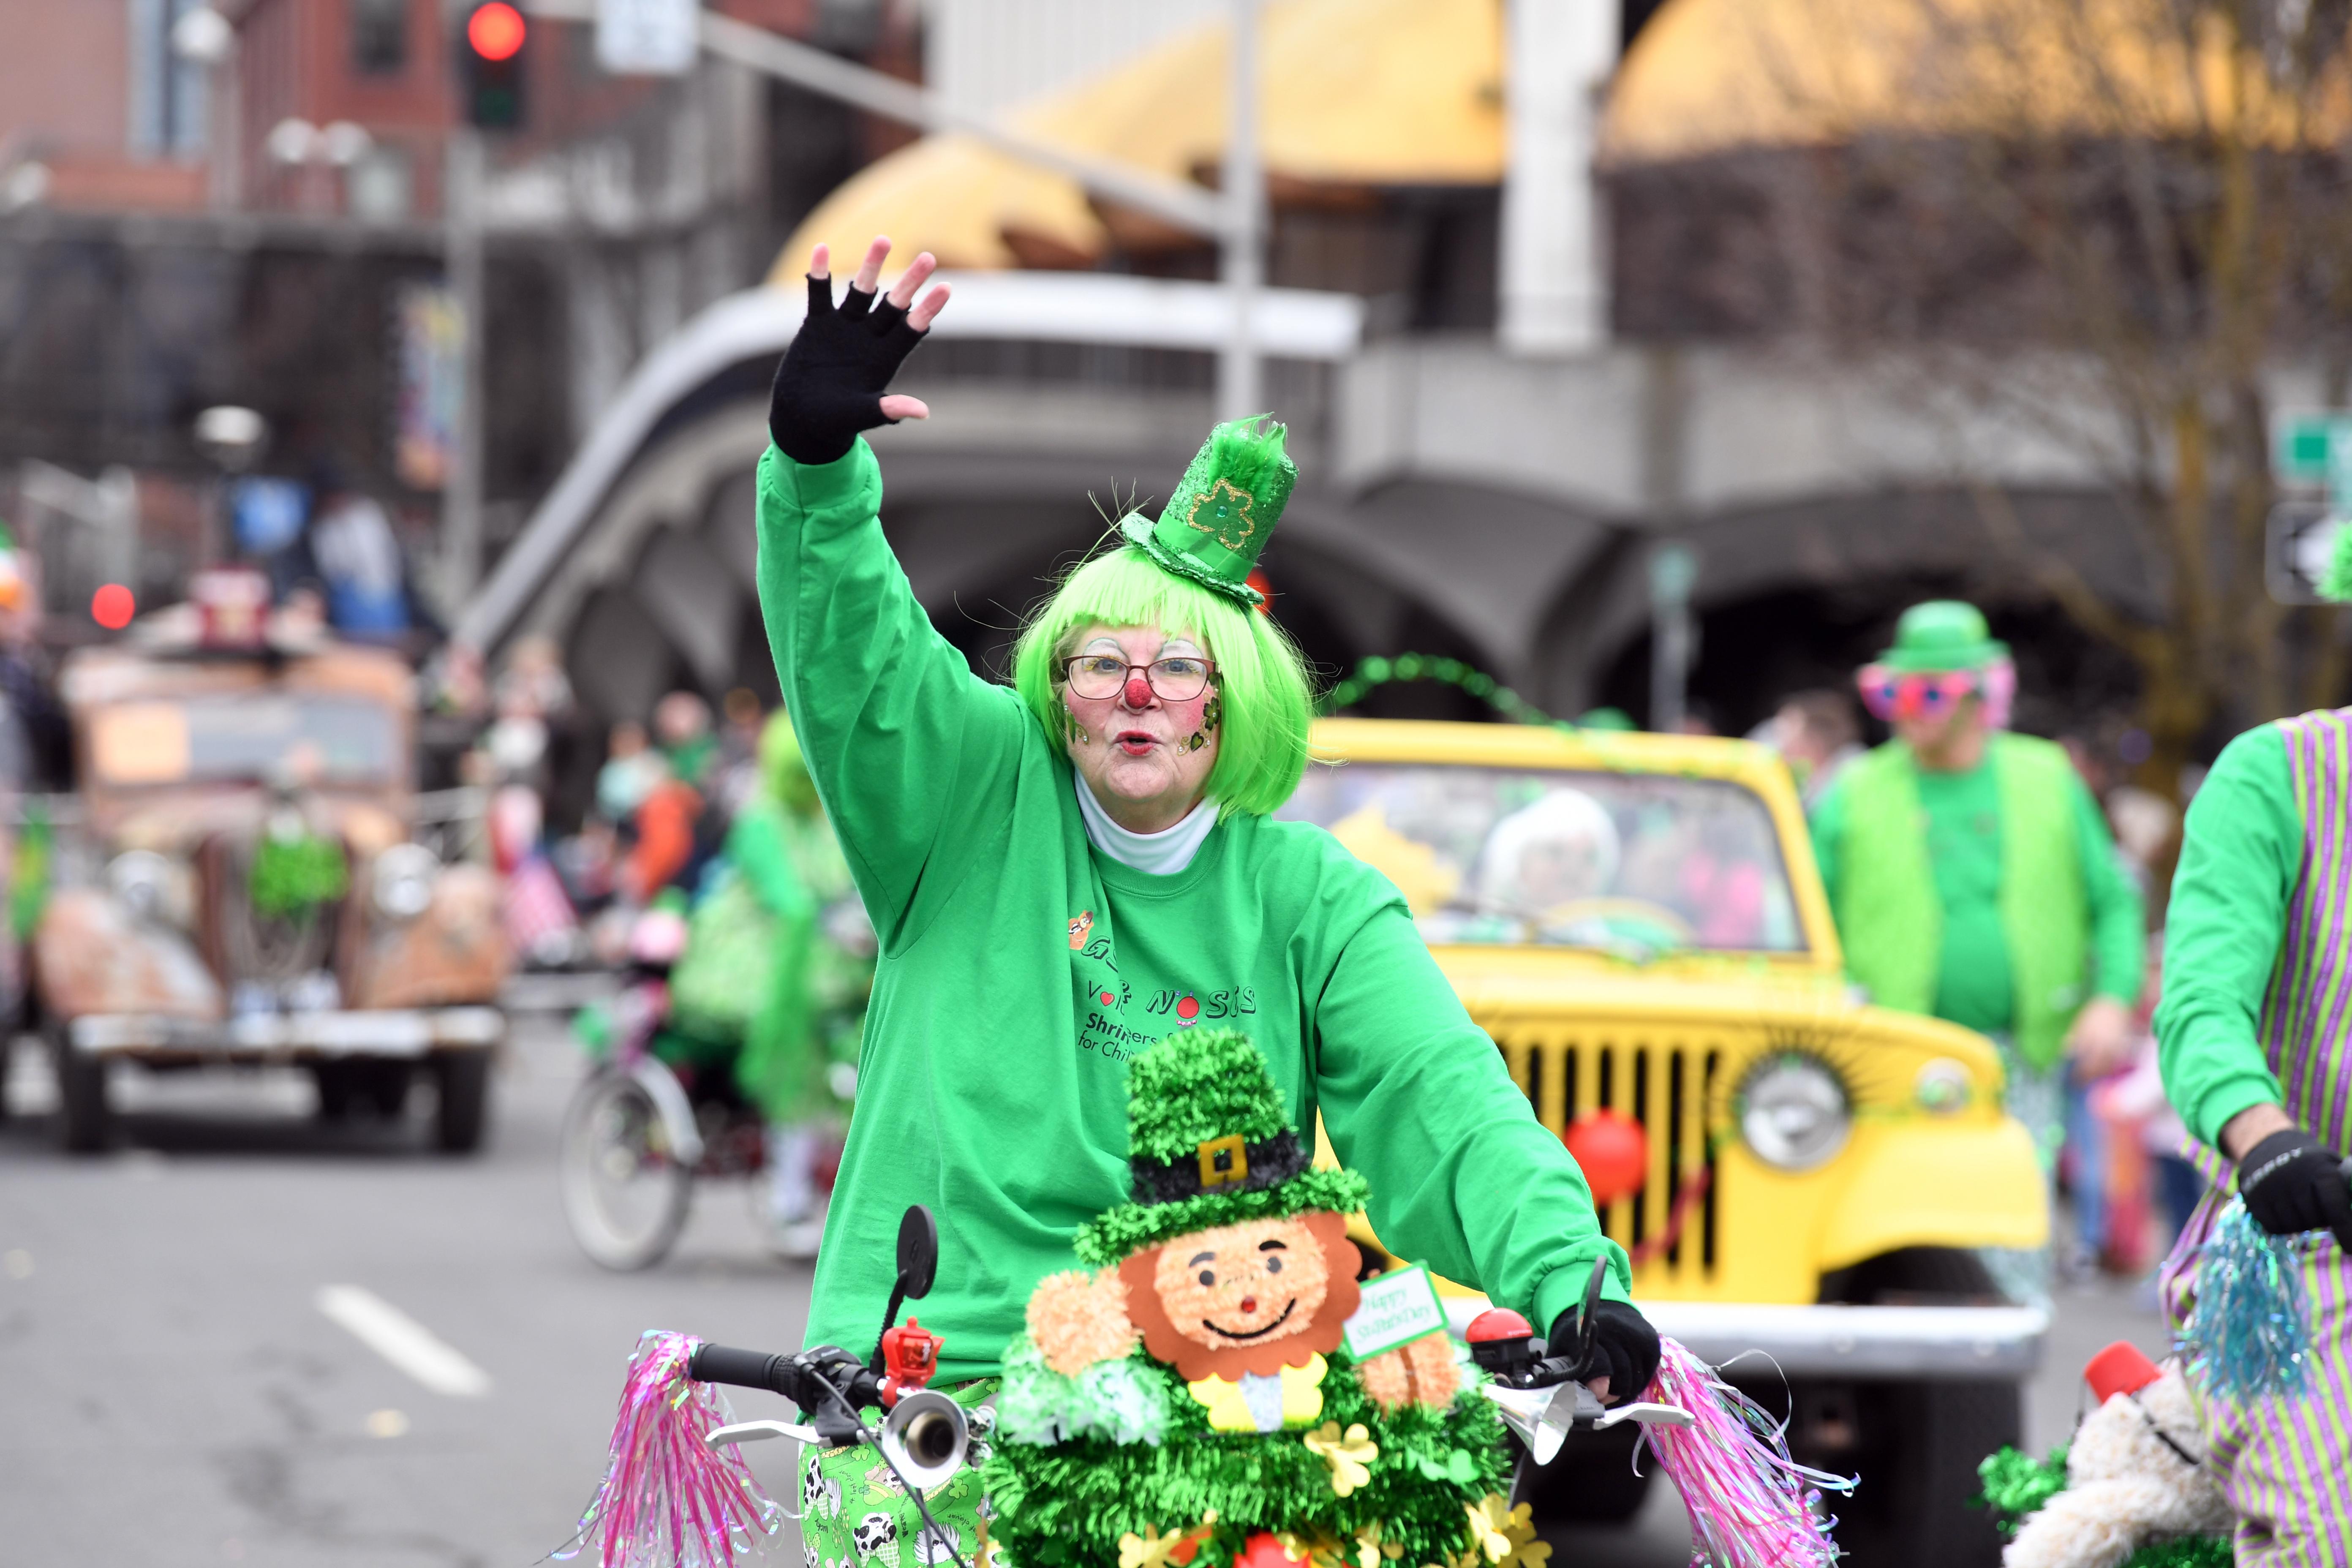 St. Patrick's Day Parade Clipart / Happy St. Patrick's Day to one and